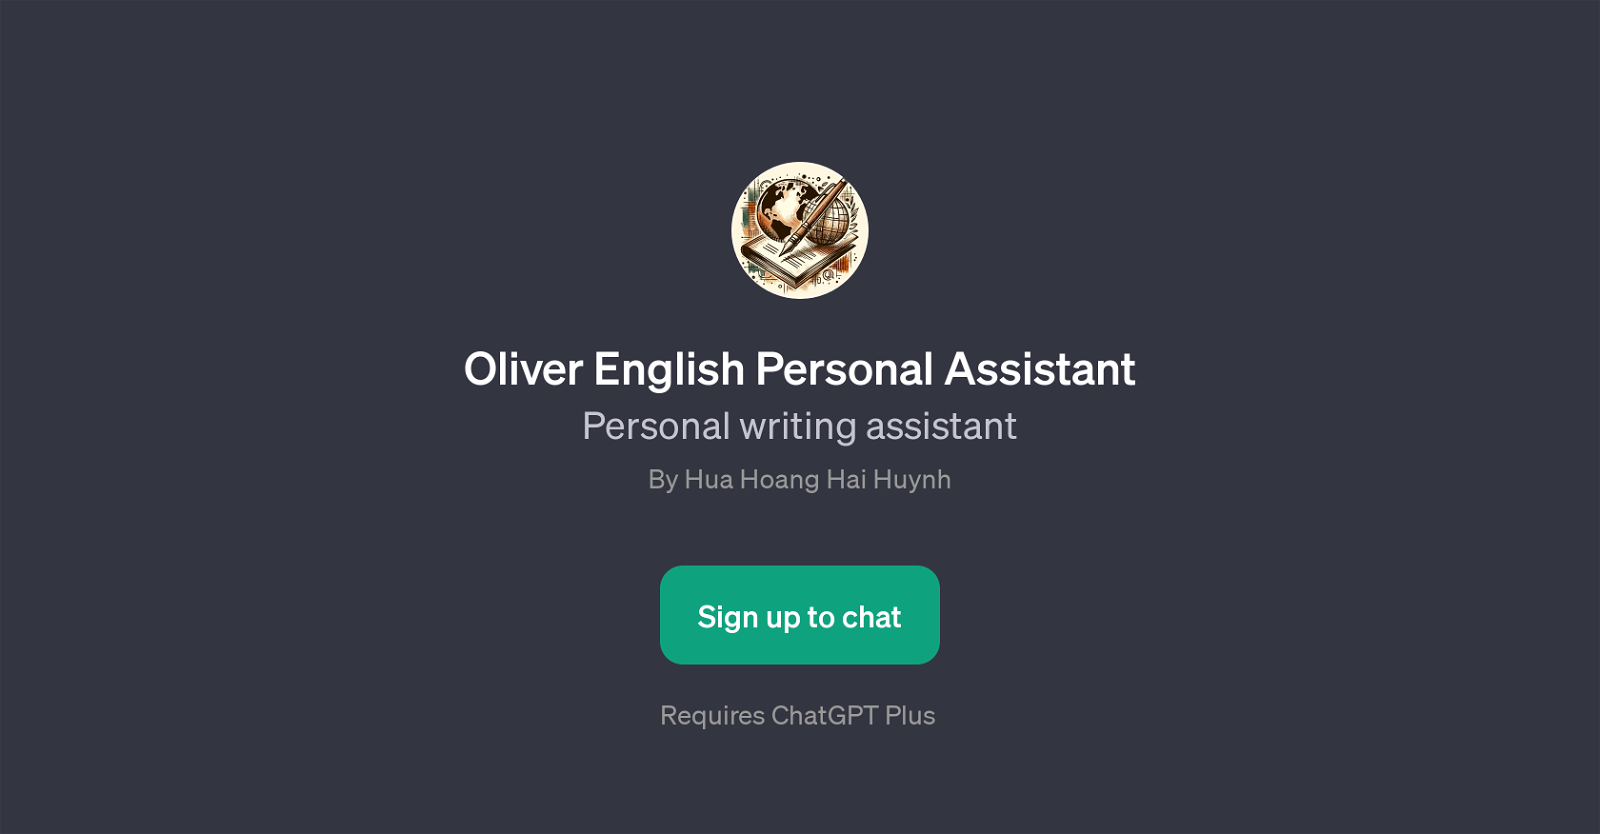 Oliver English Personal Assistant website